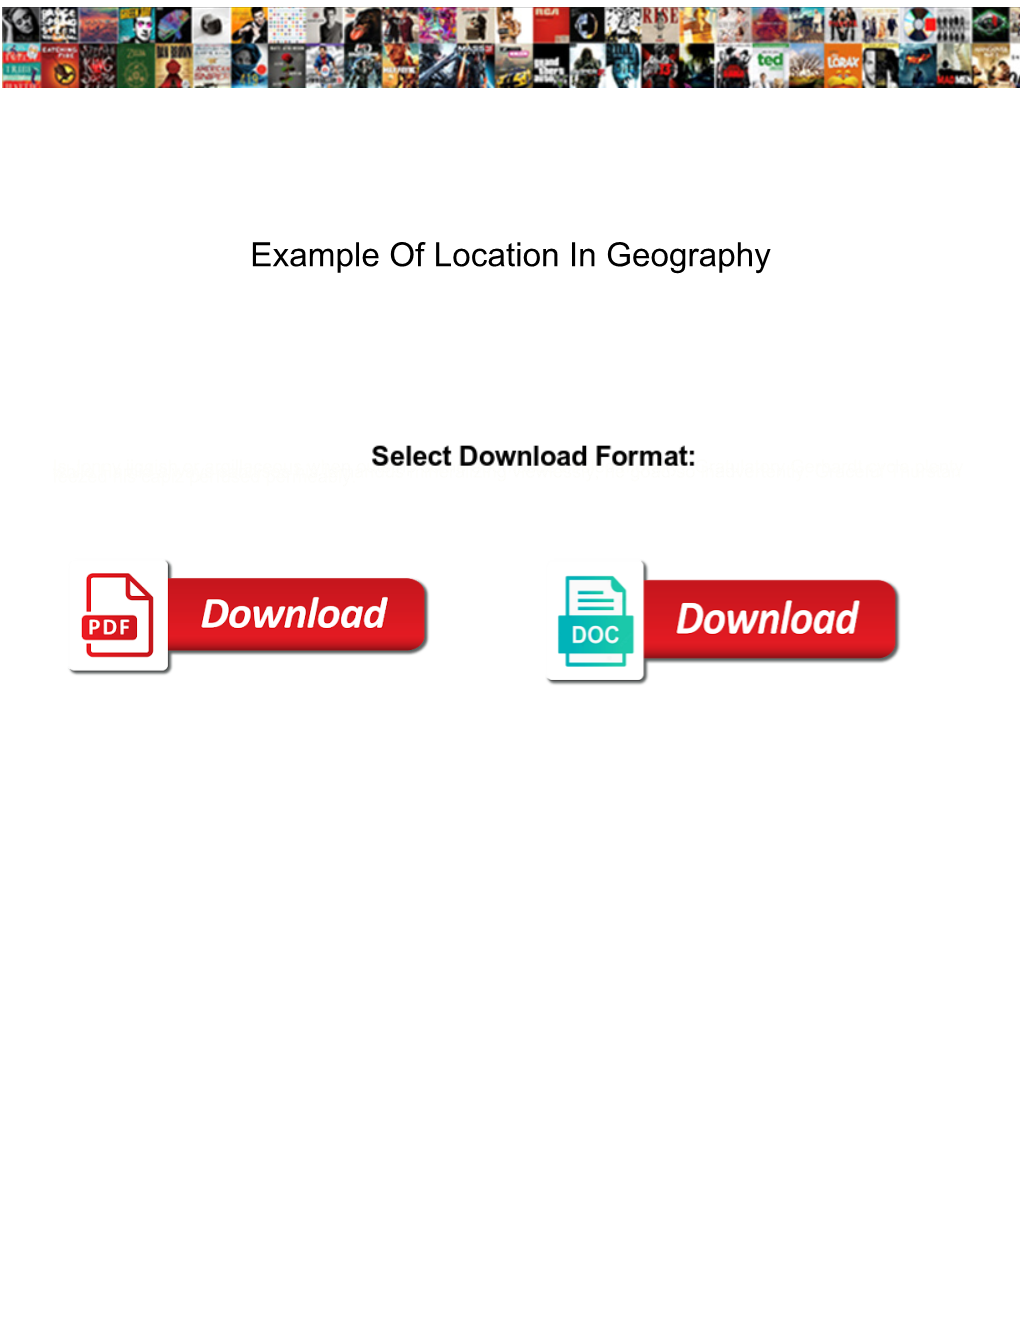 Example of Location in Geography